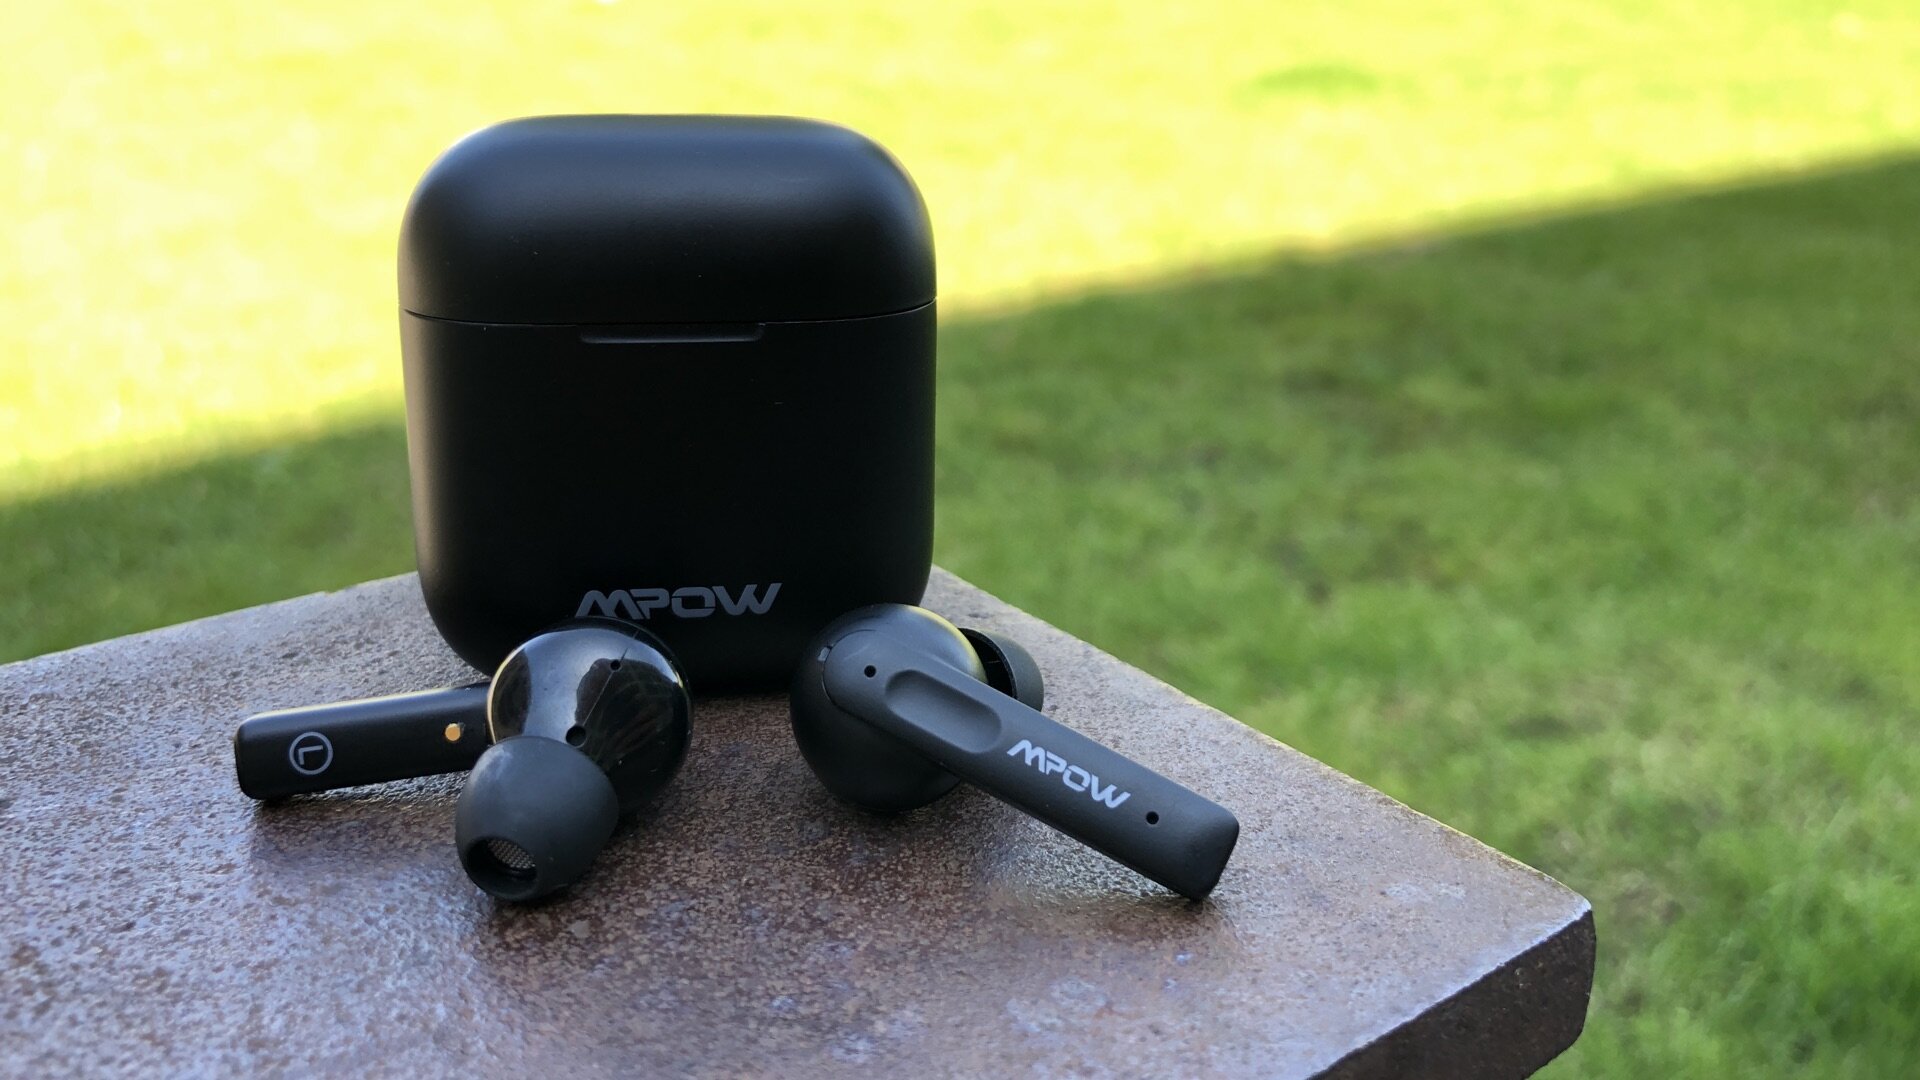 Aukey EP-N7 review: Good cheap wireless ANC earbuds?